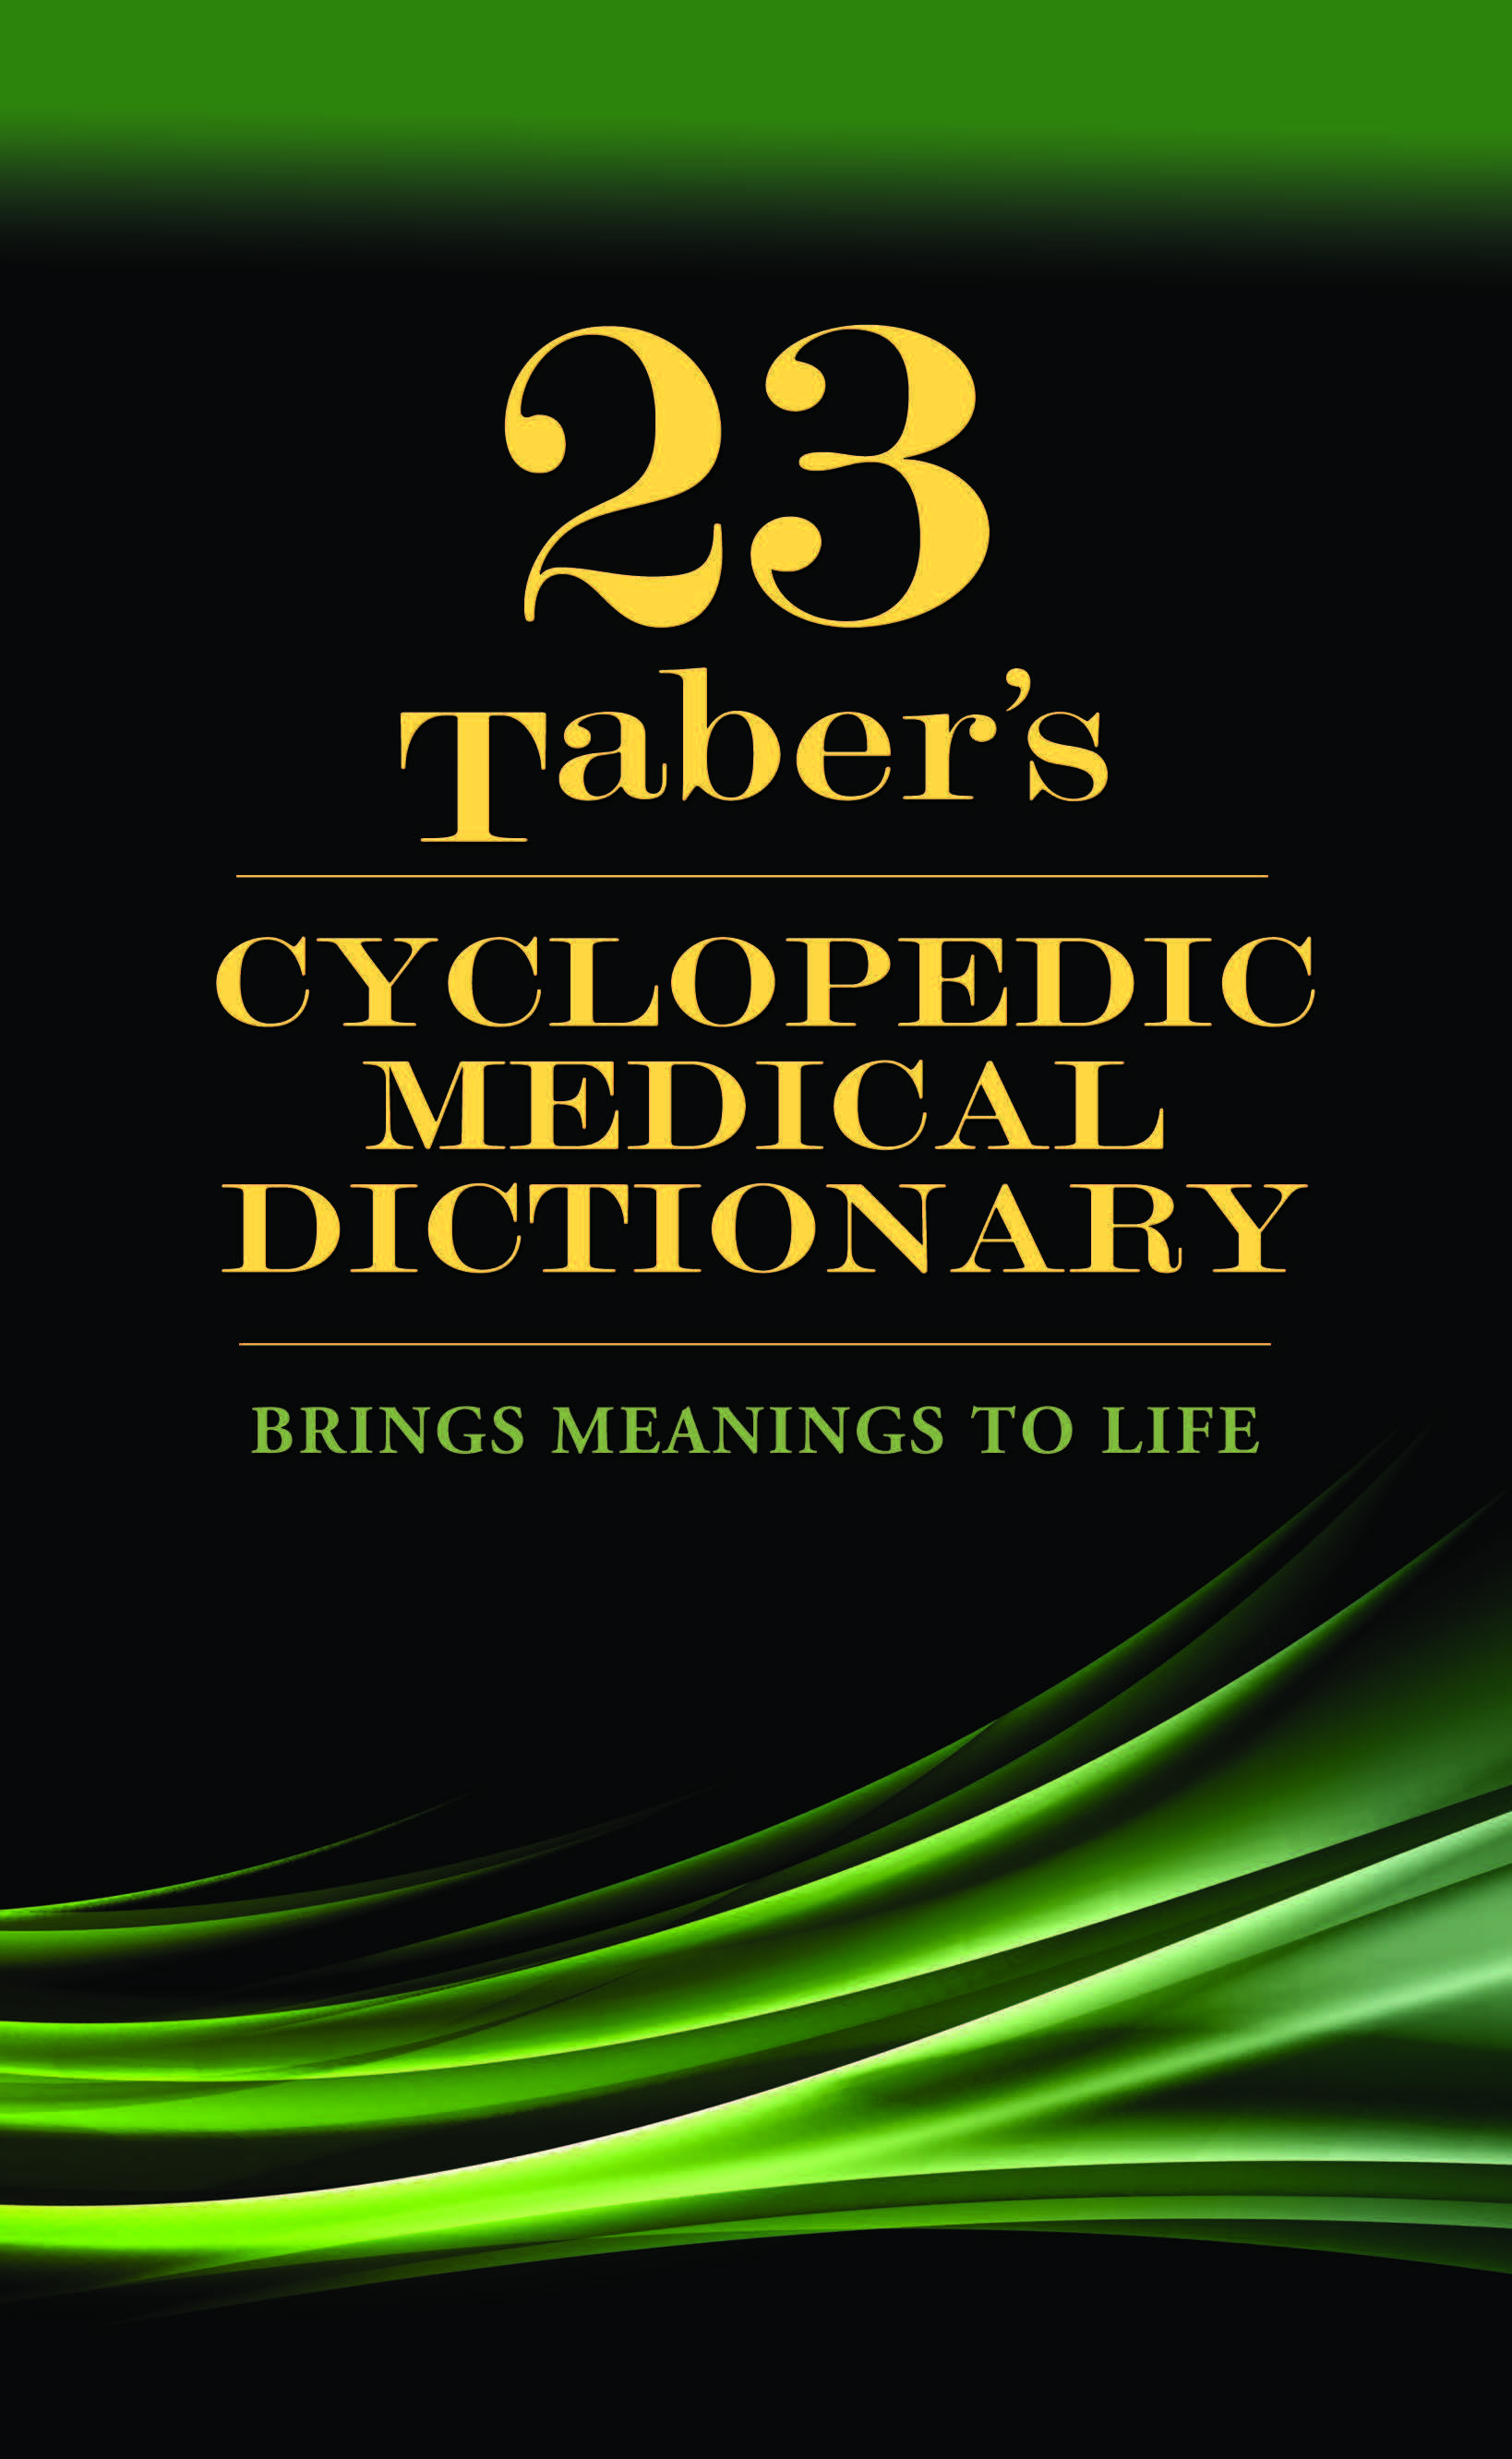 tabers dictionary pdf free download